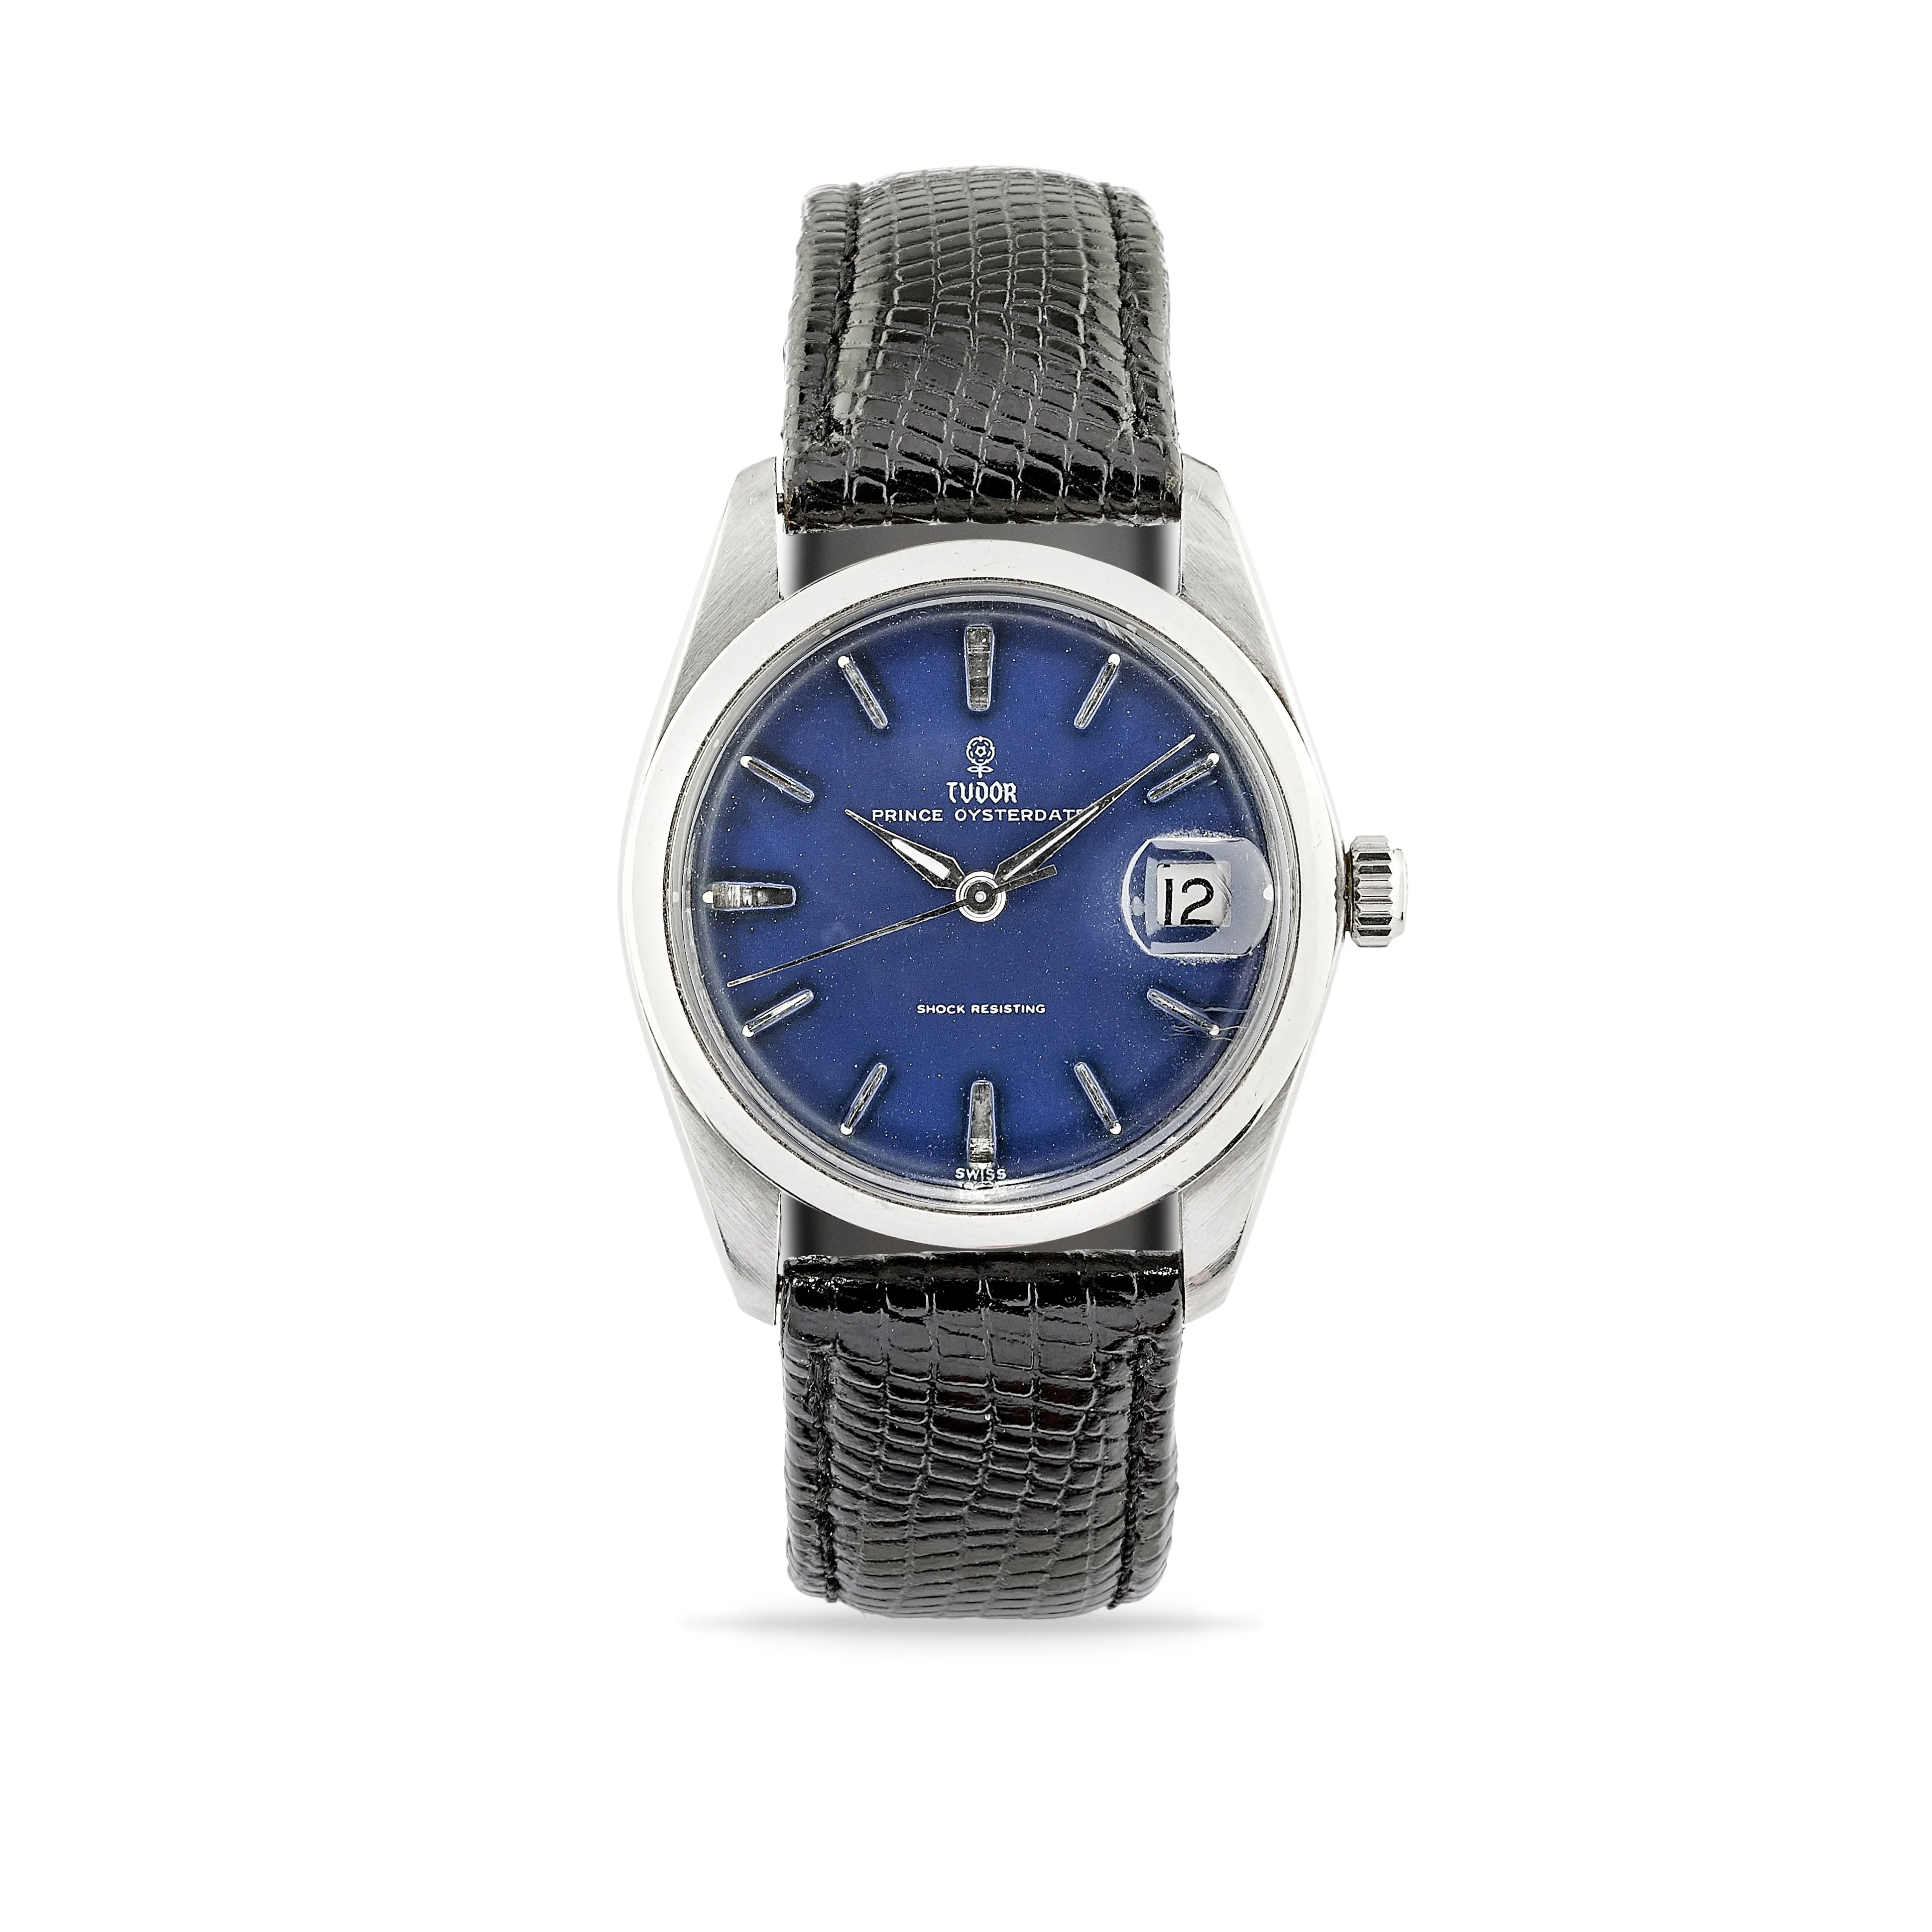 Tudor Prince Oysterdate 7962 33mm Stainless steel Blue